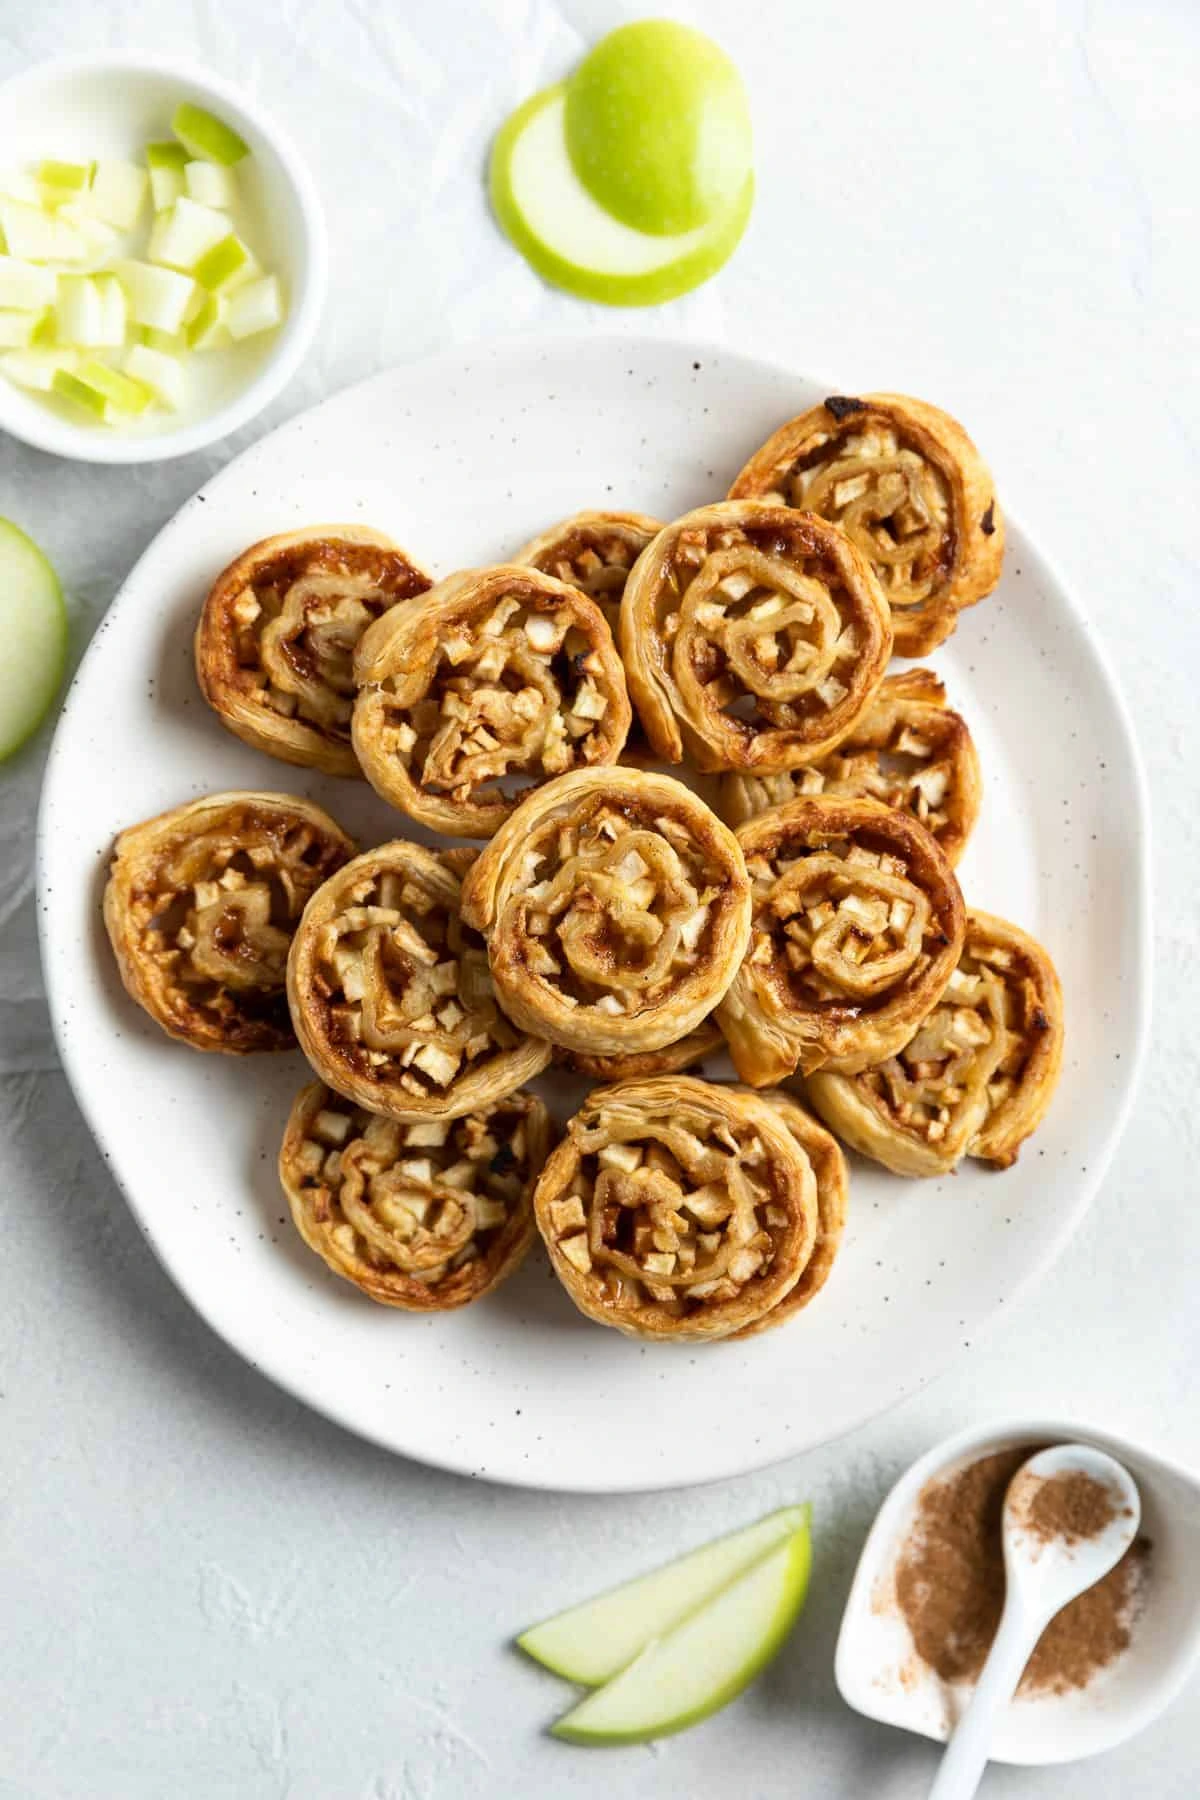 Pinwheels served on a white plate with cinnamon and apple slices.